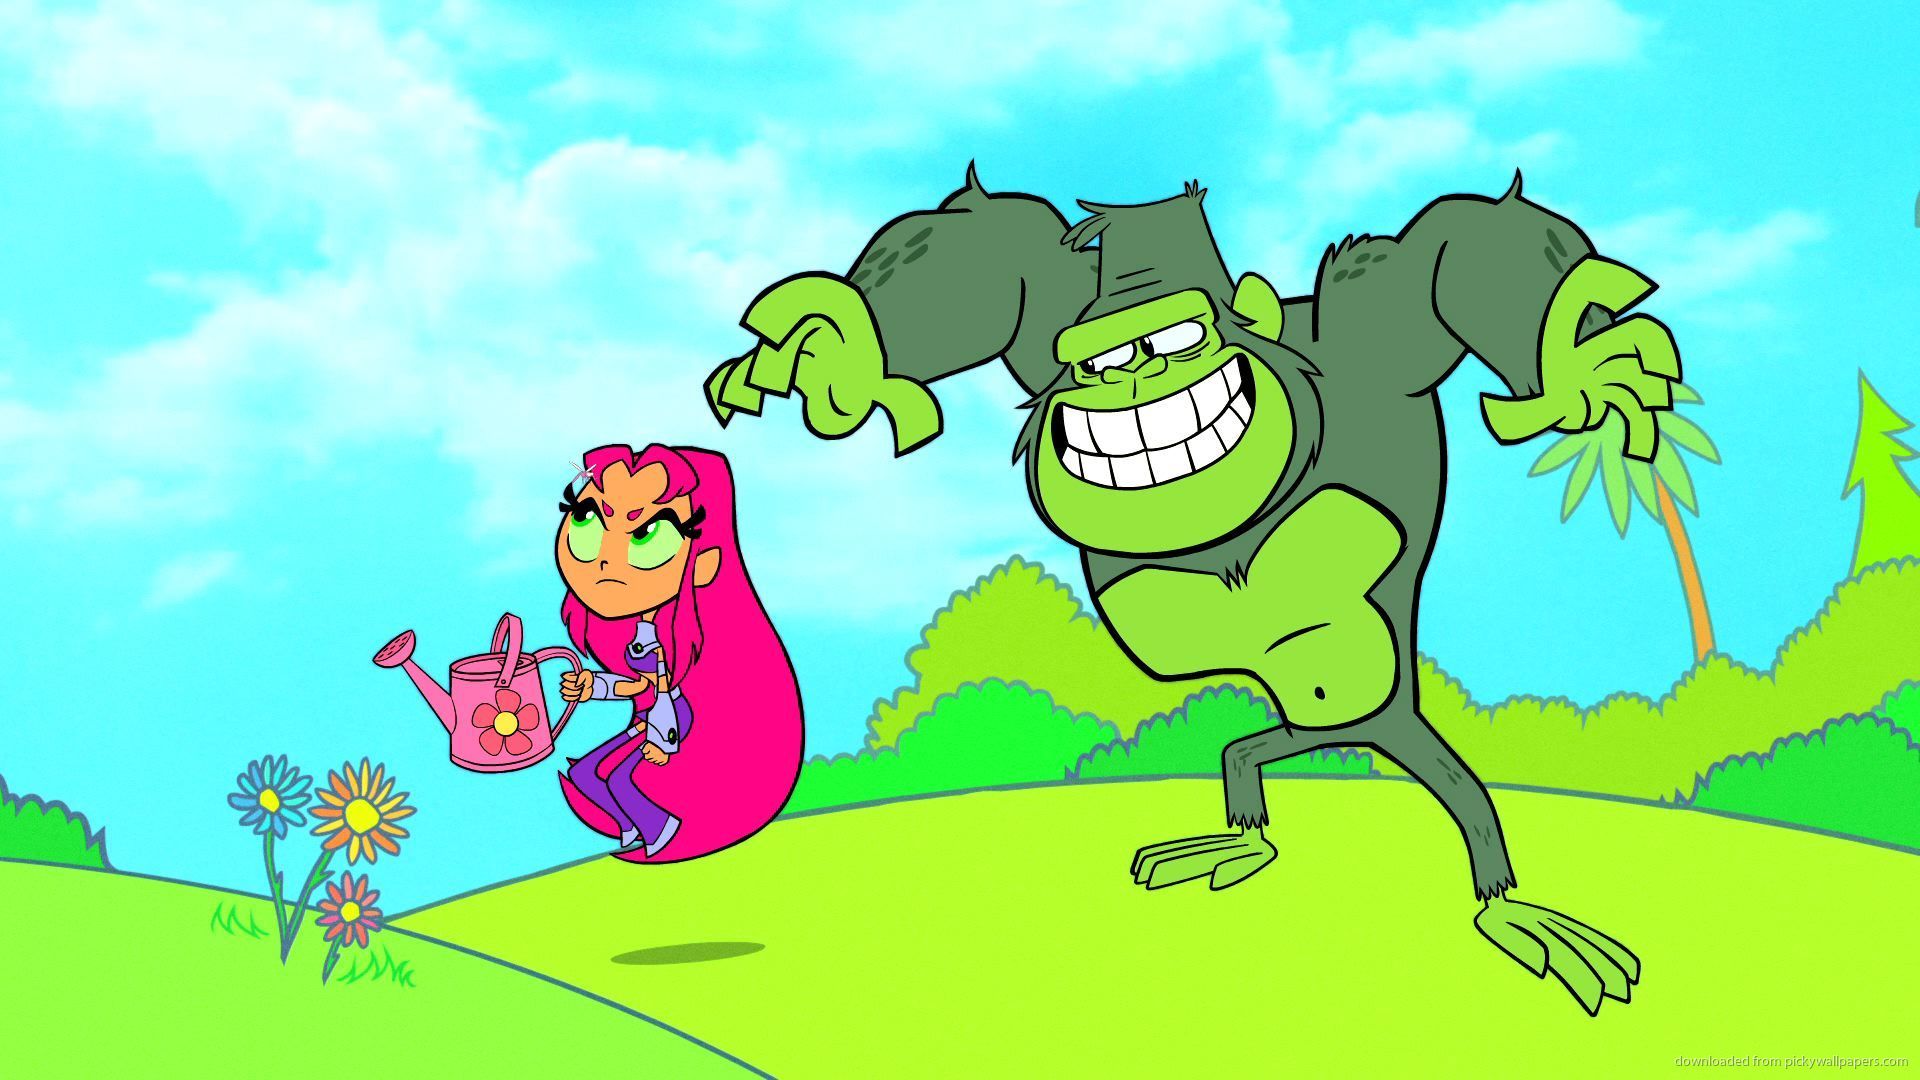 Teen Titans Go Wallpaper Picture For iPhone Blackberry iPad